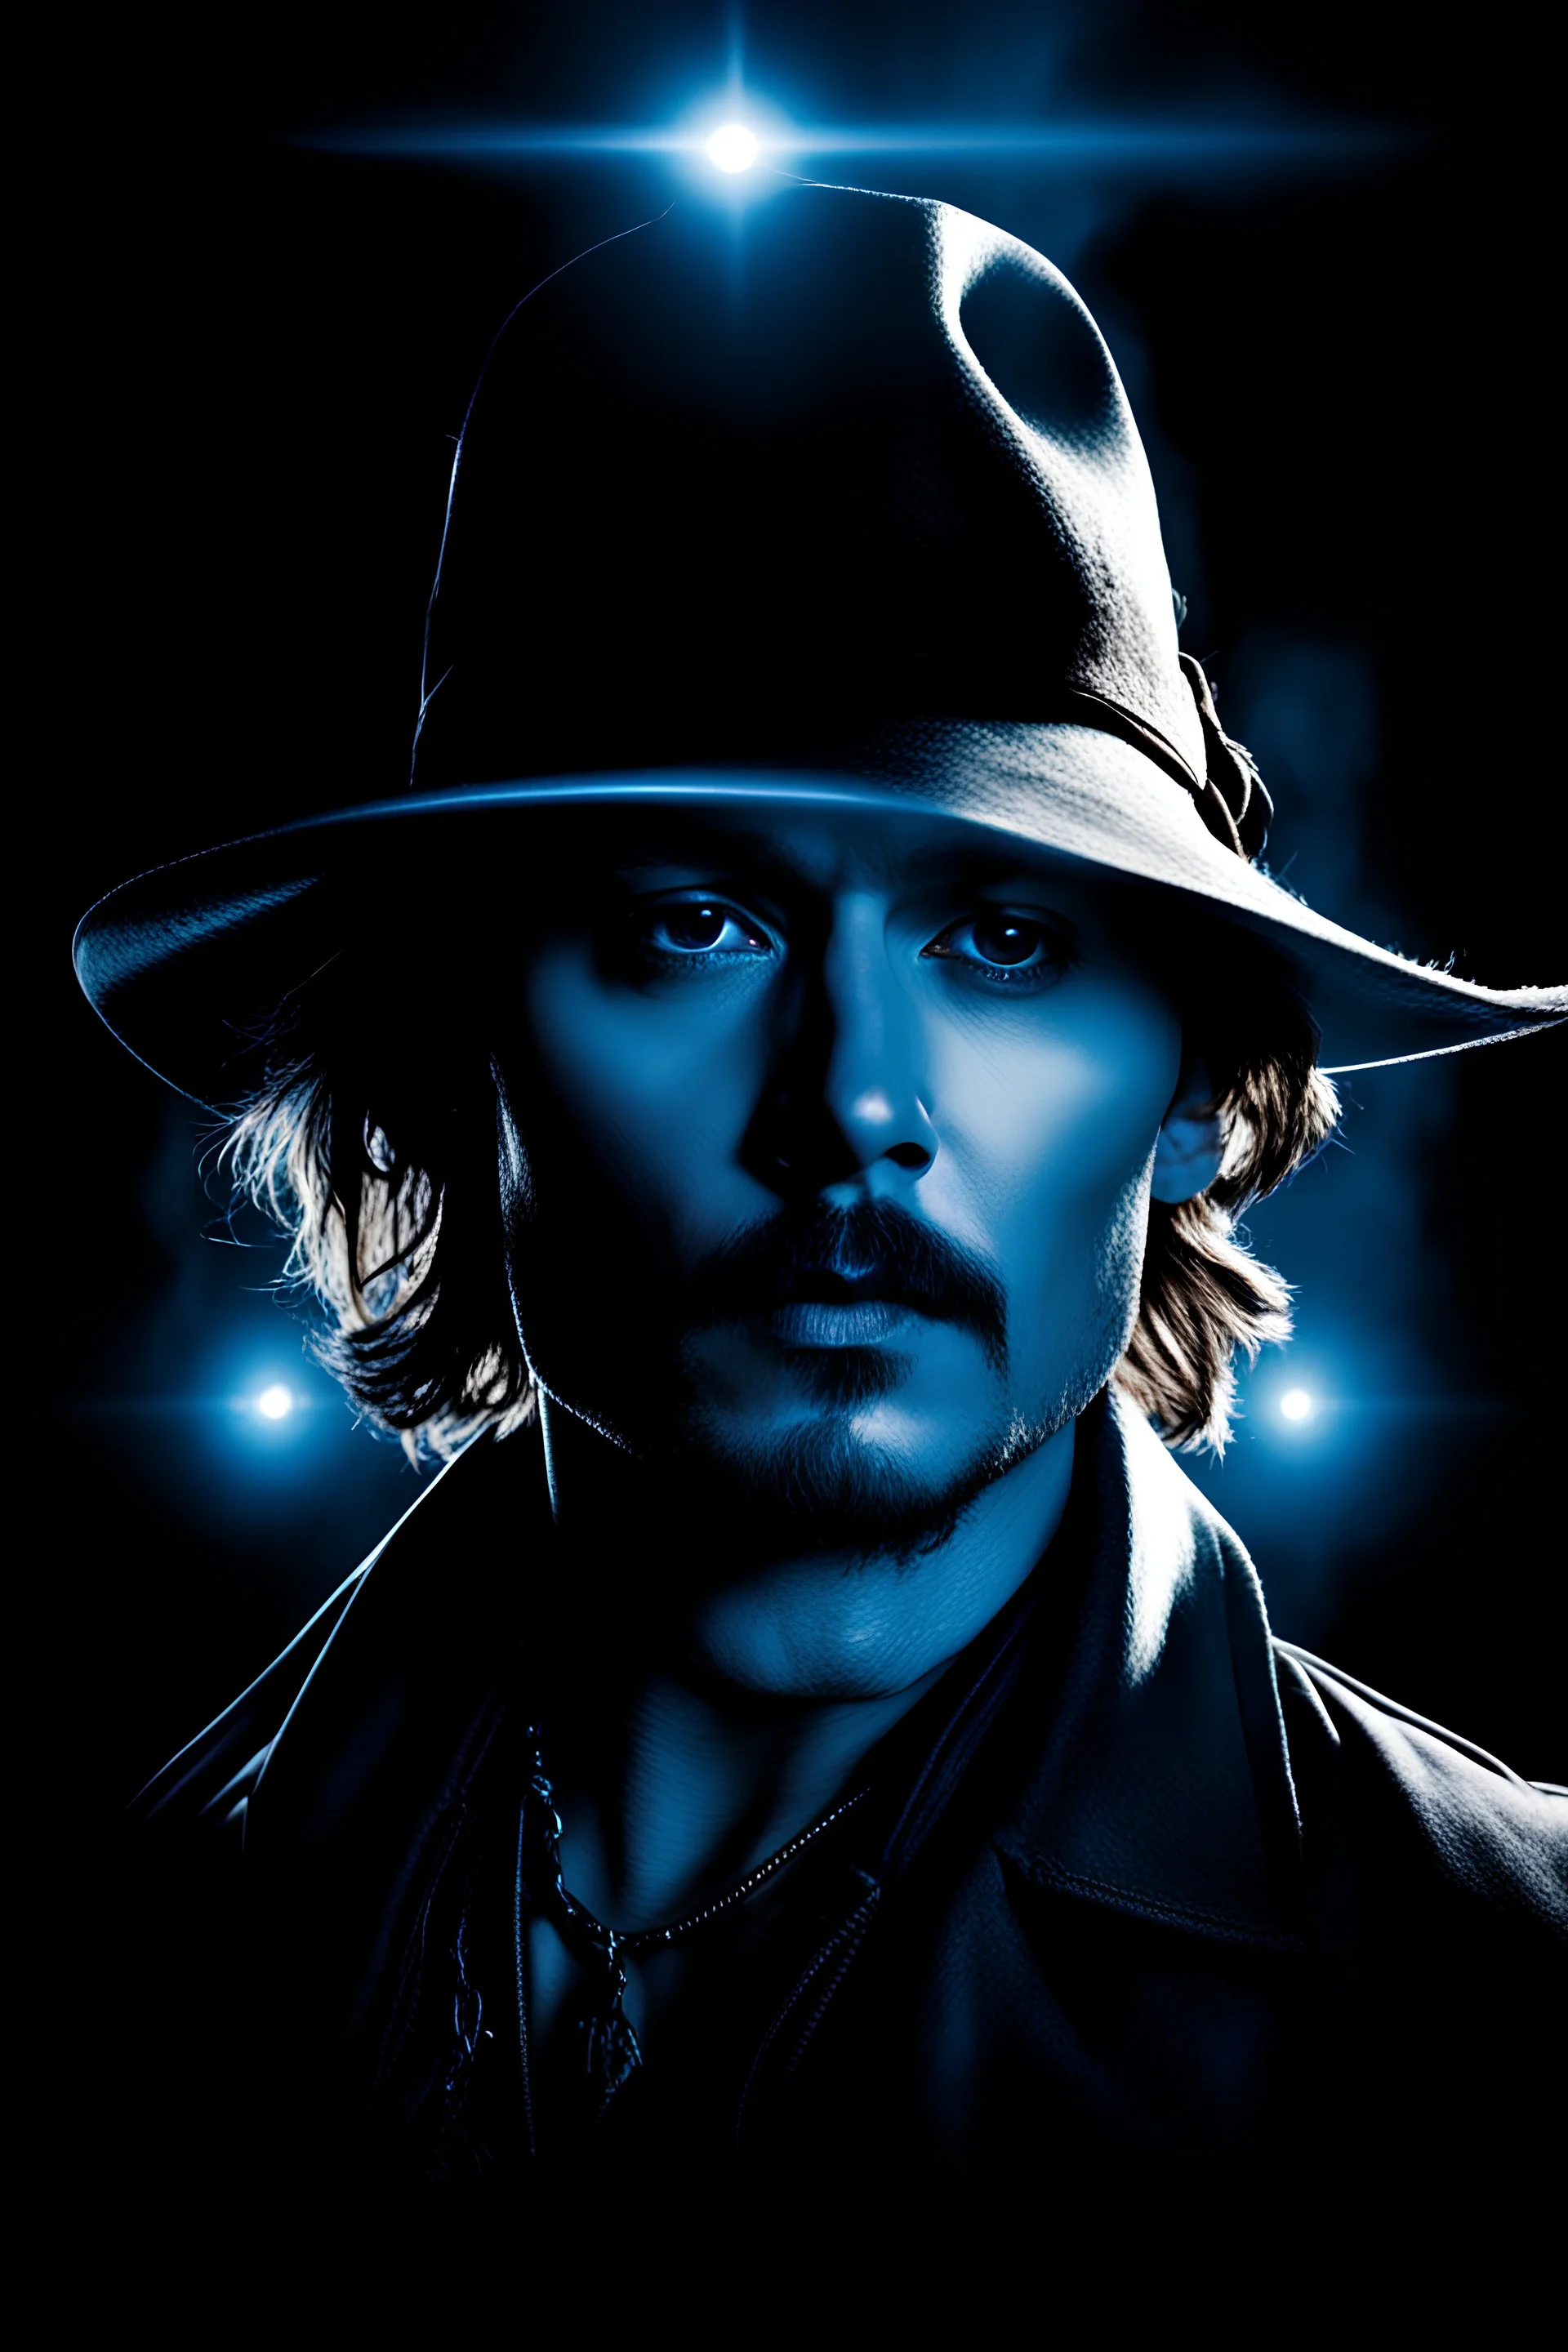 pitch-black background with a blue glowing overhead spotlight effect, Johnny Depp